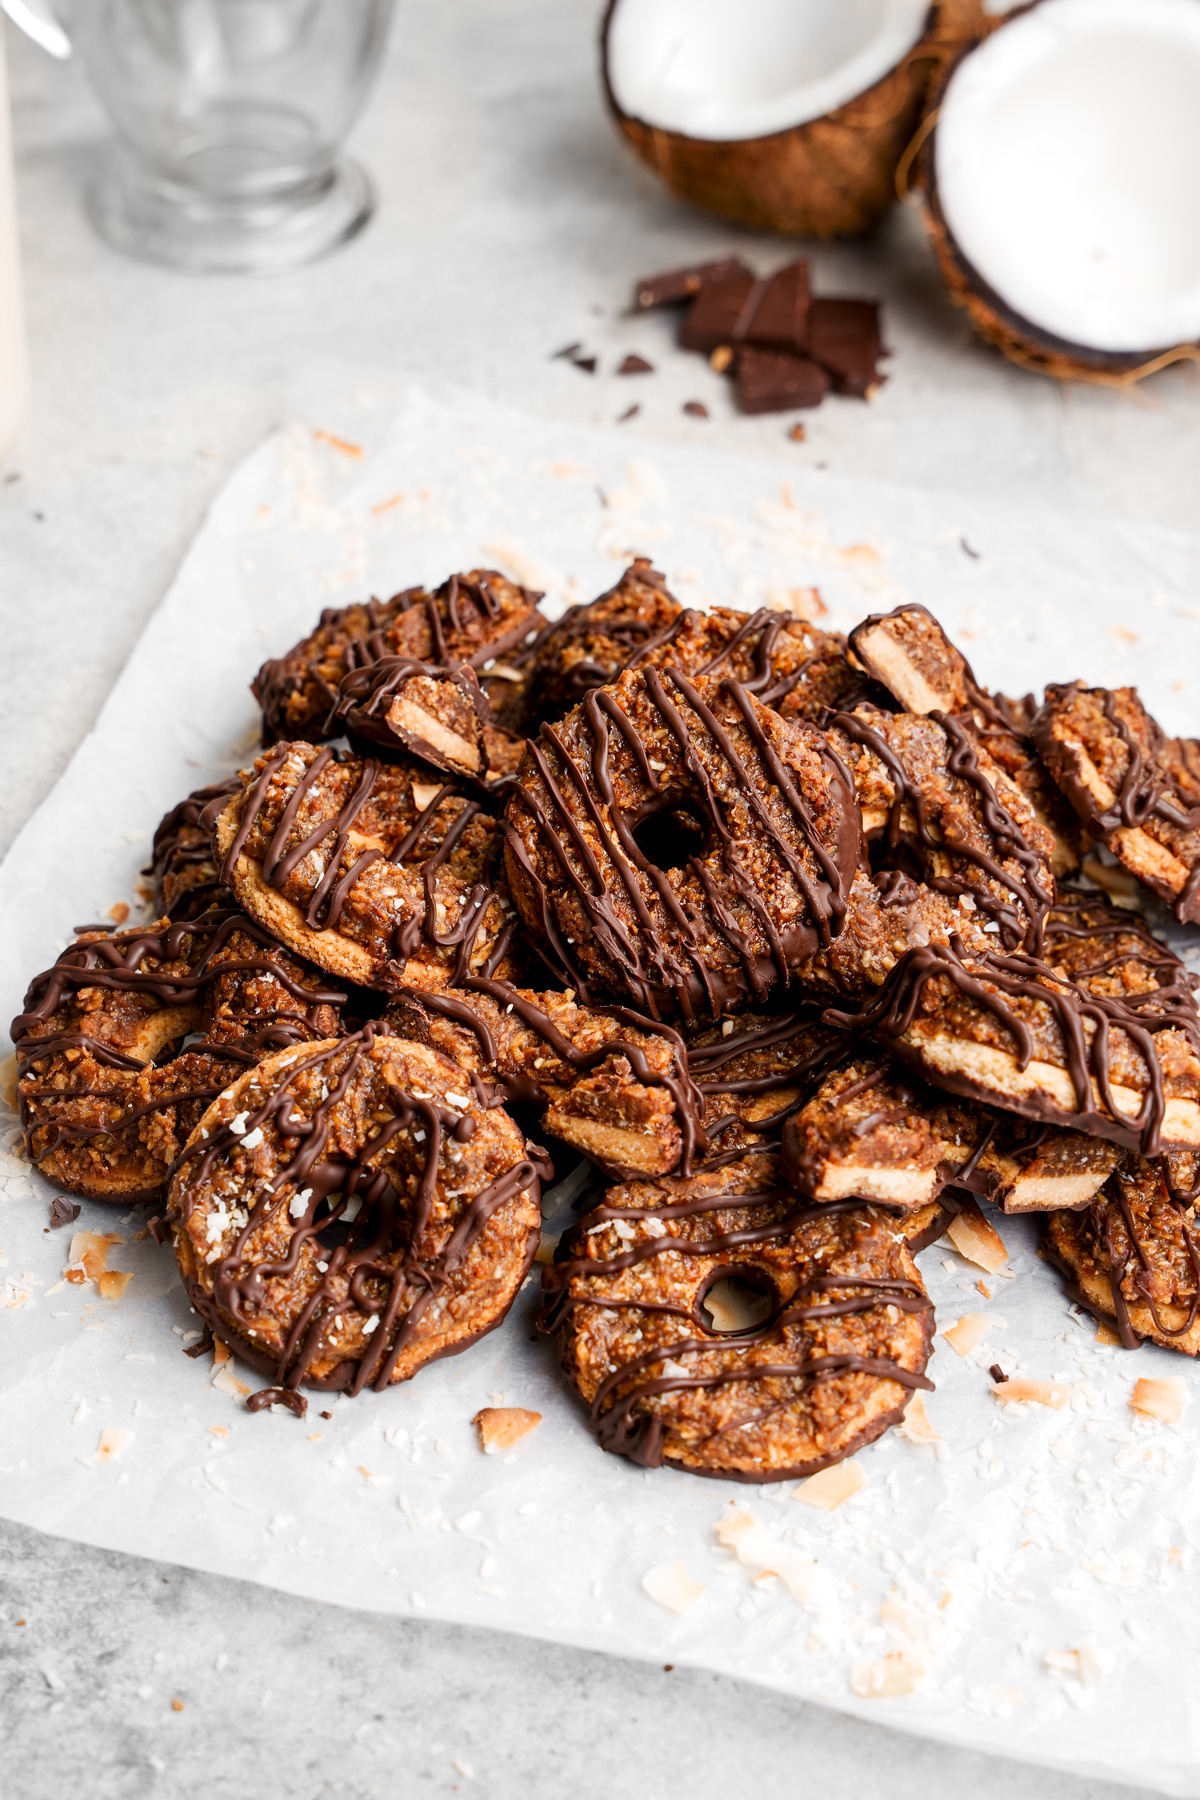 the vegan samoas piled on top of each other with coconut and chocolate in the background